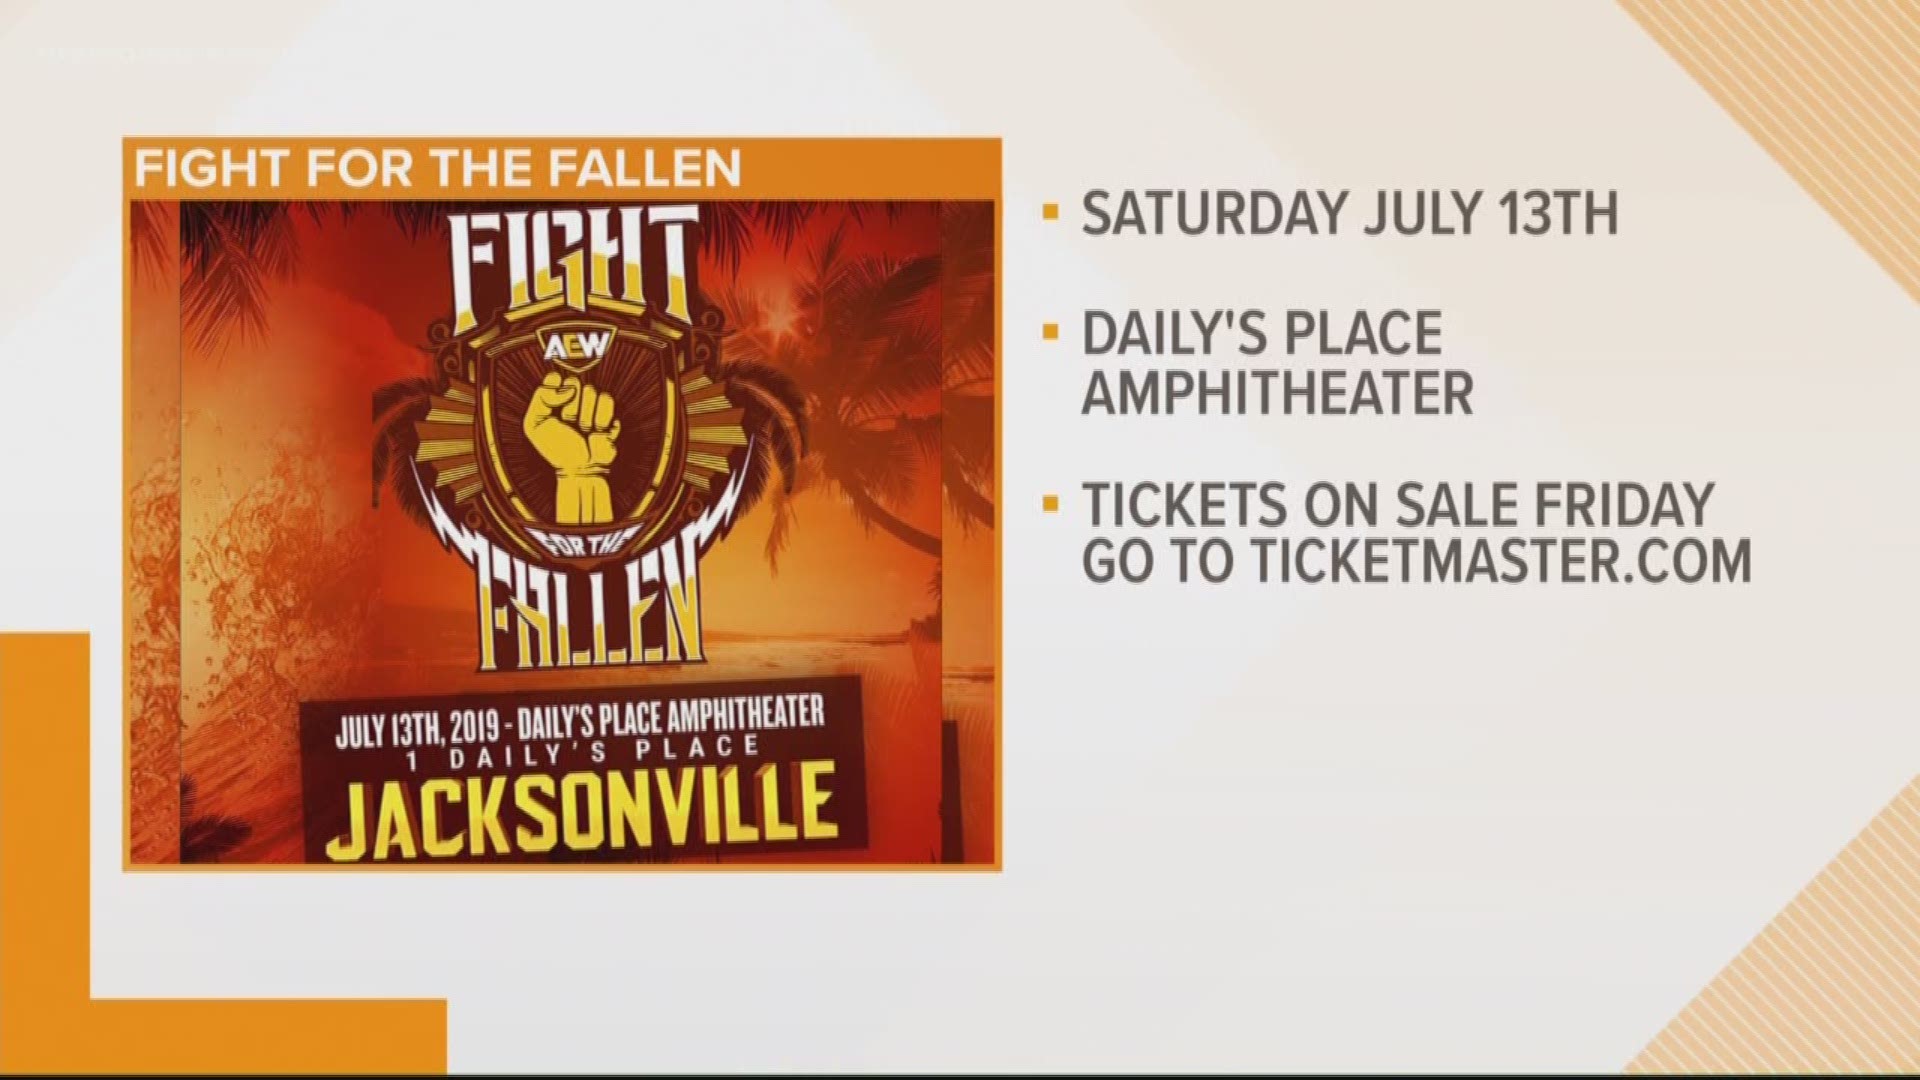 The event, properly titled "Fight for the Fallen," is going to be held at the Daily's Place Saturday, July 13, just feet from where the company held its inaugural event back in January 2019.